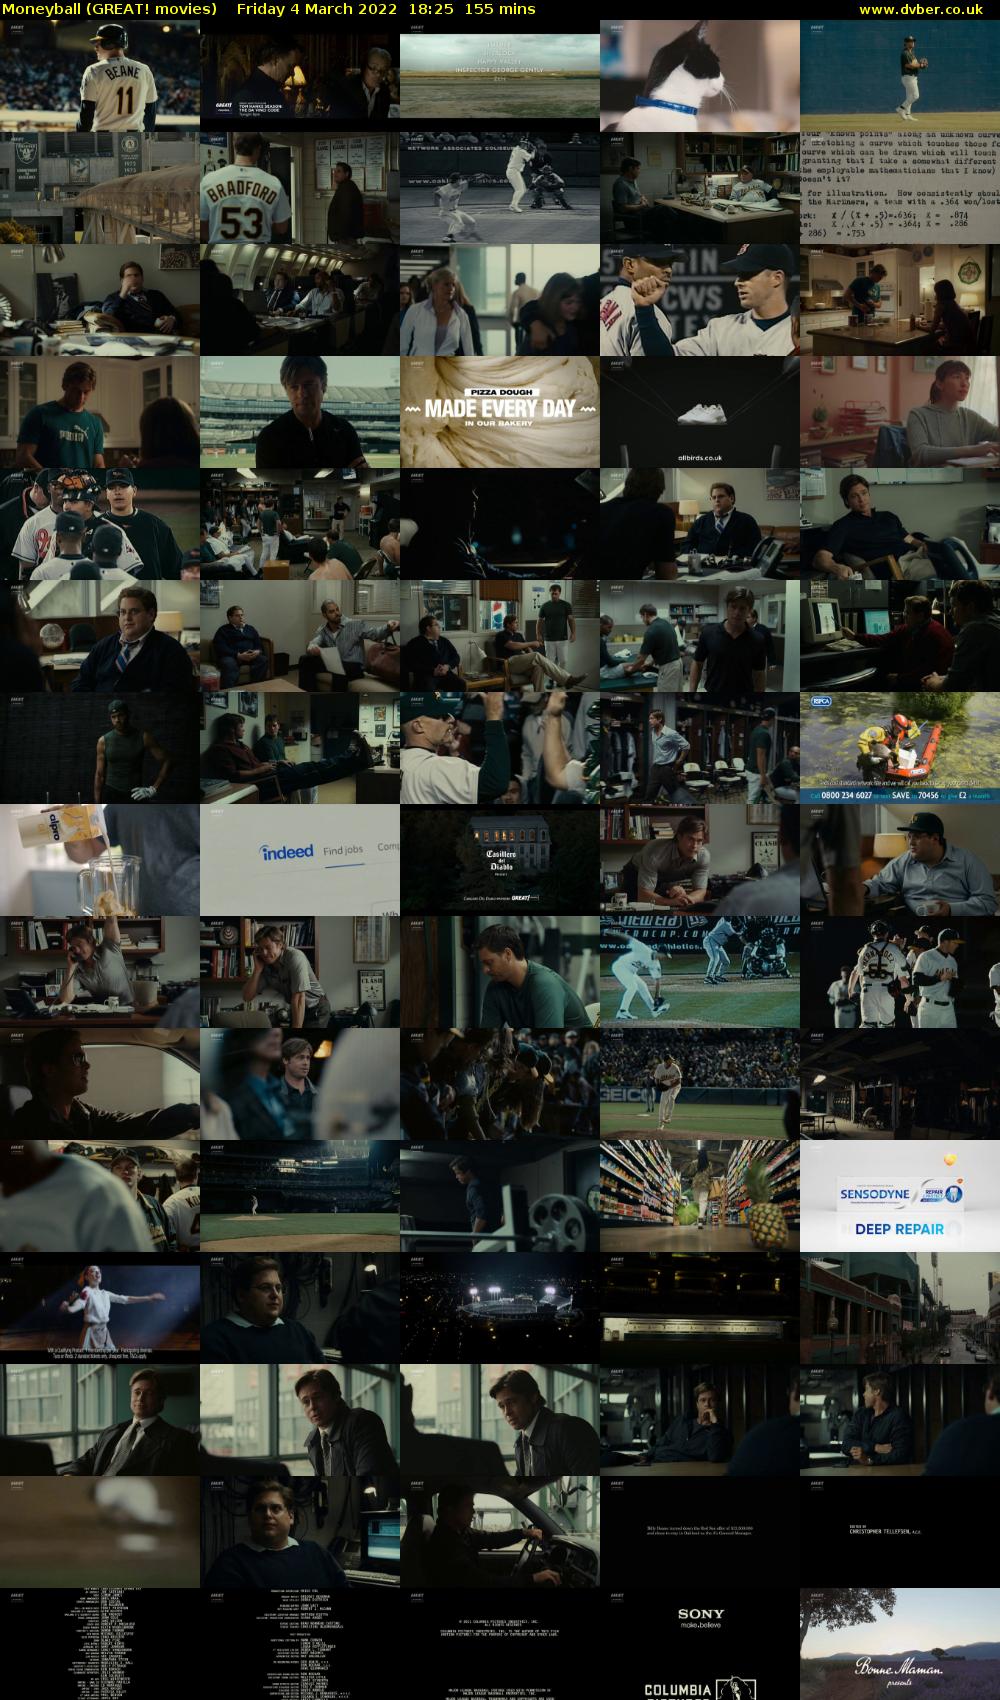 Moneyball (GREAT! movies) Friday 4 March 2022 18:25 - 21:00